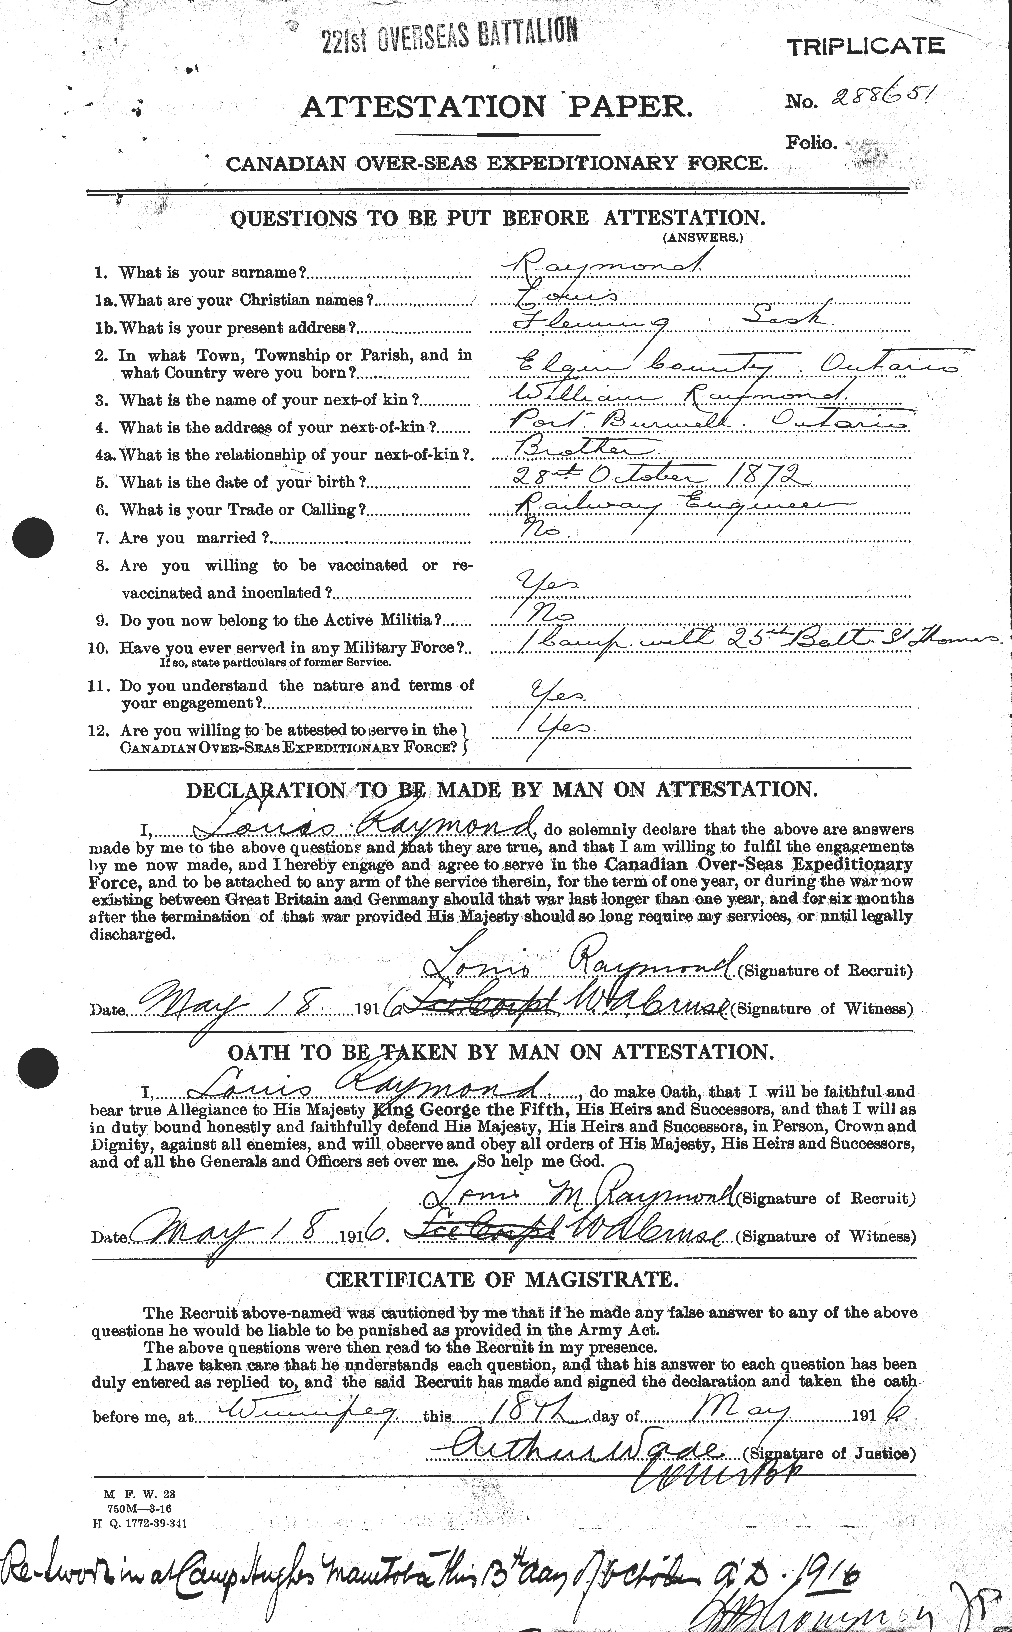 Personnel Records of the First World War - CEF 595416a